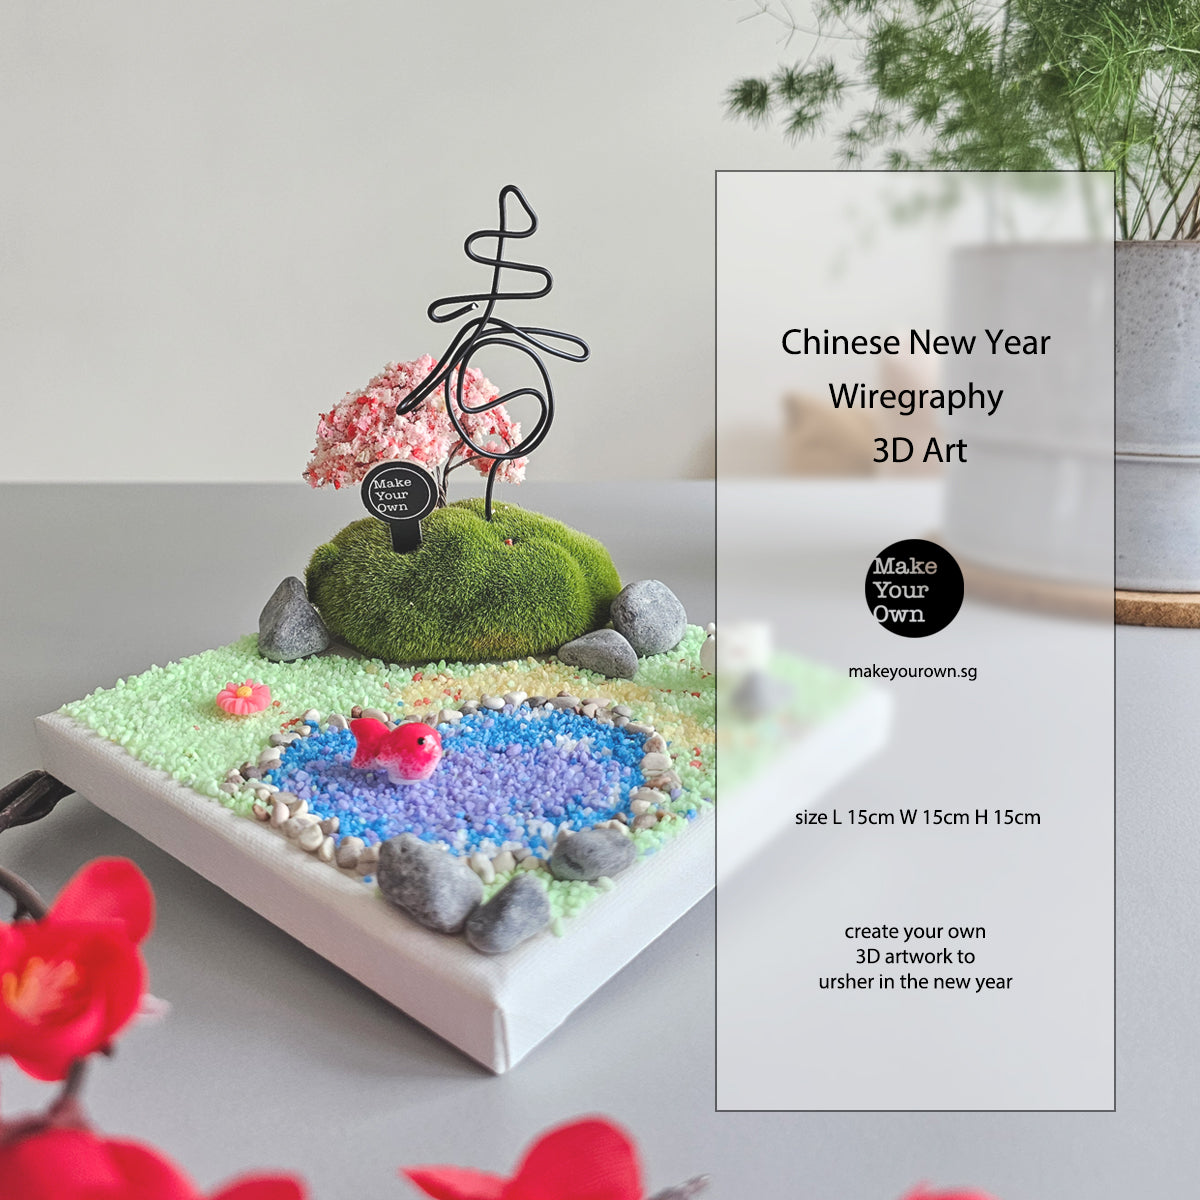 Corporate Chinese New Year Wiregraphy 3D Art Workshop